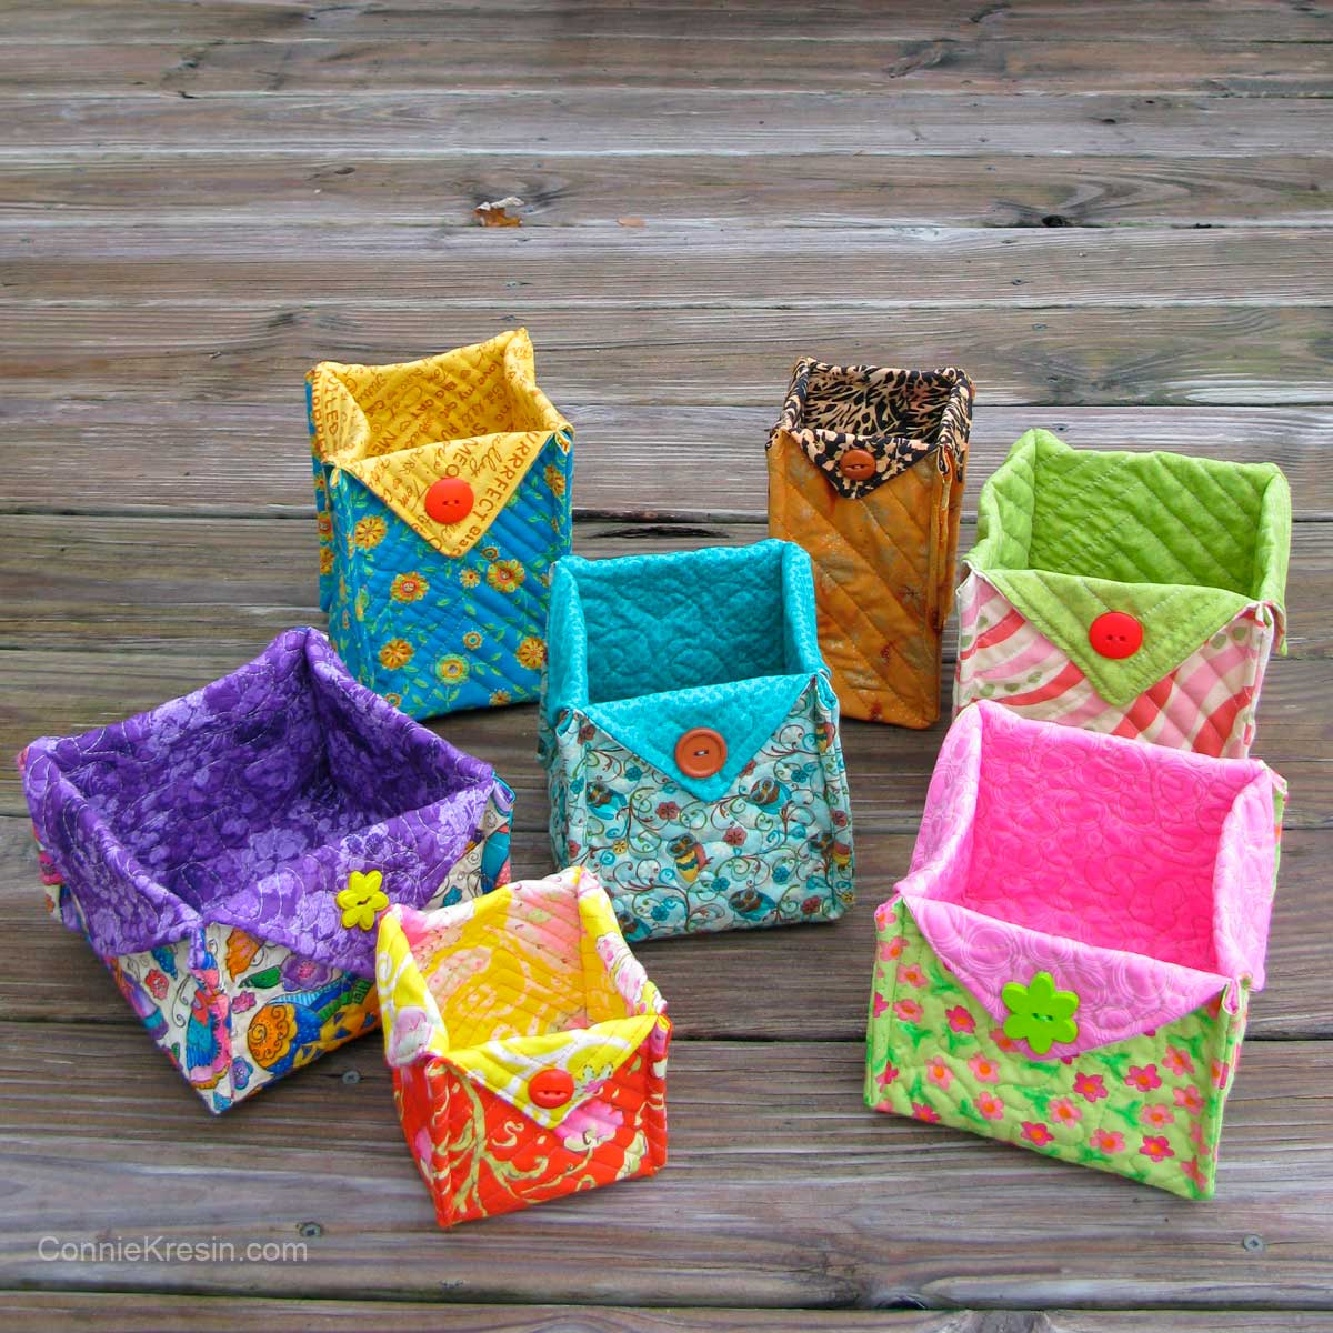 Square Fabric Baskets Sweing Pattern With Buttons